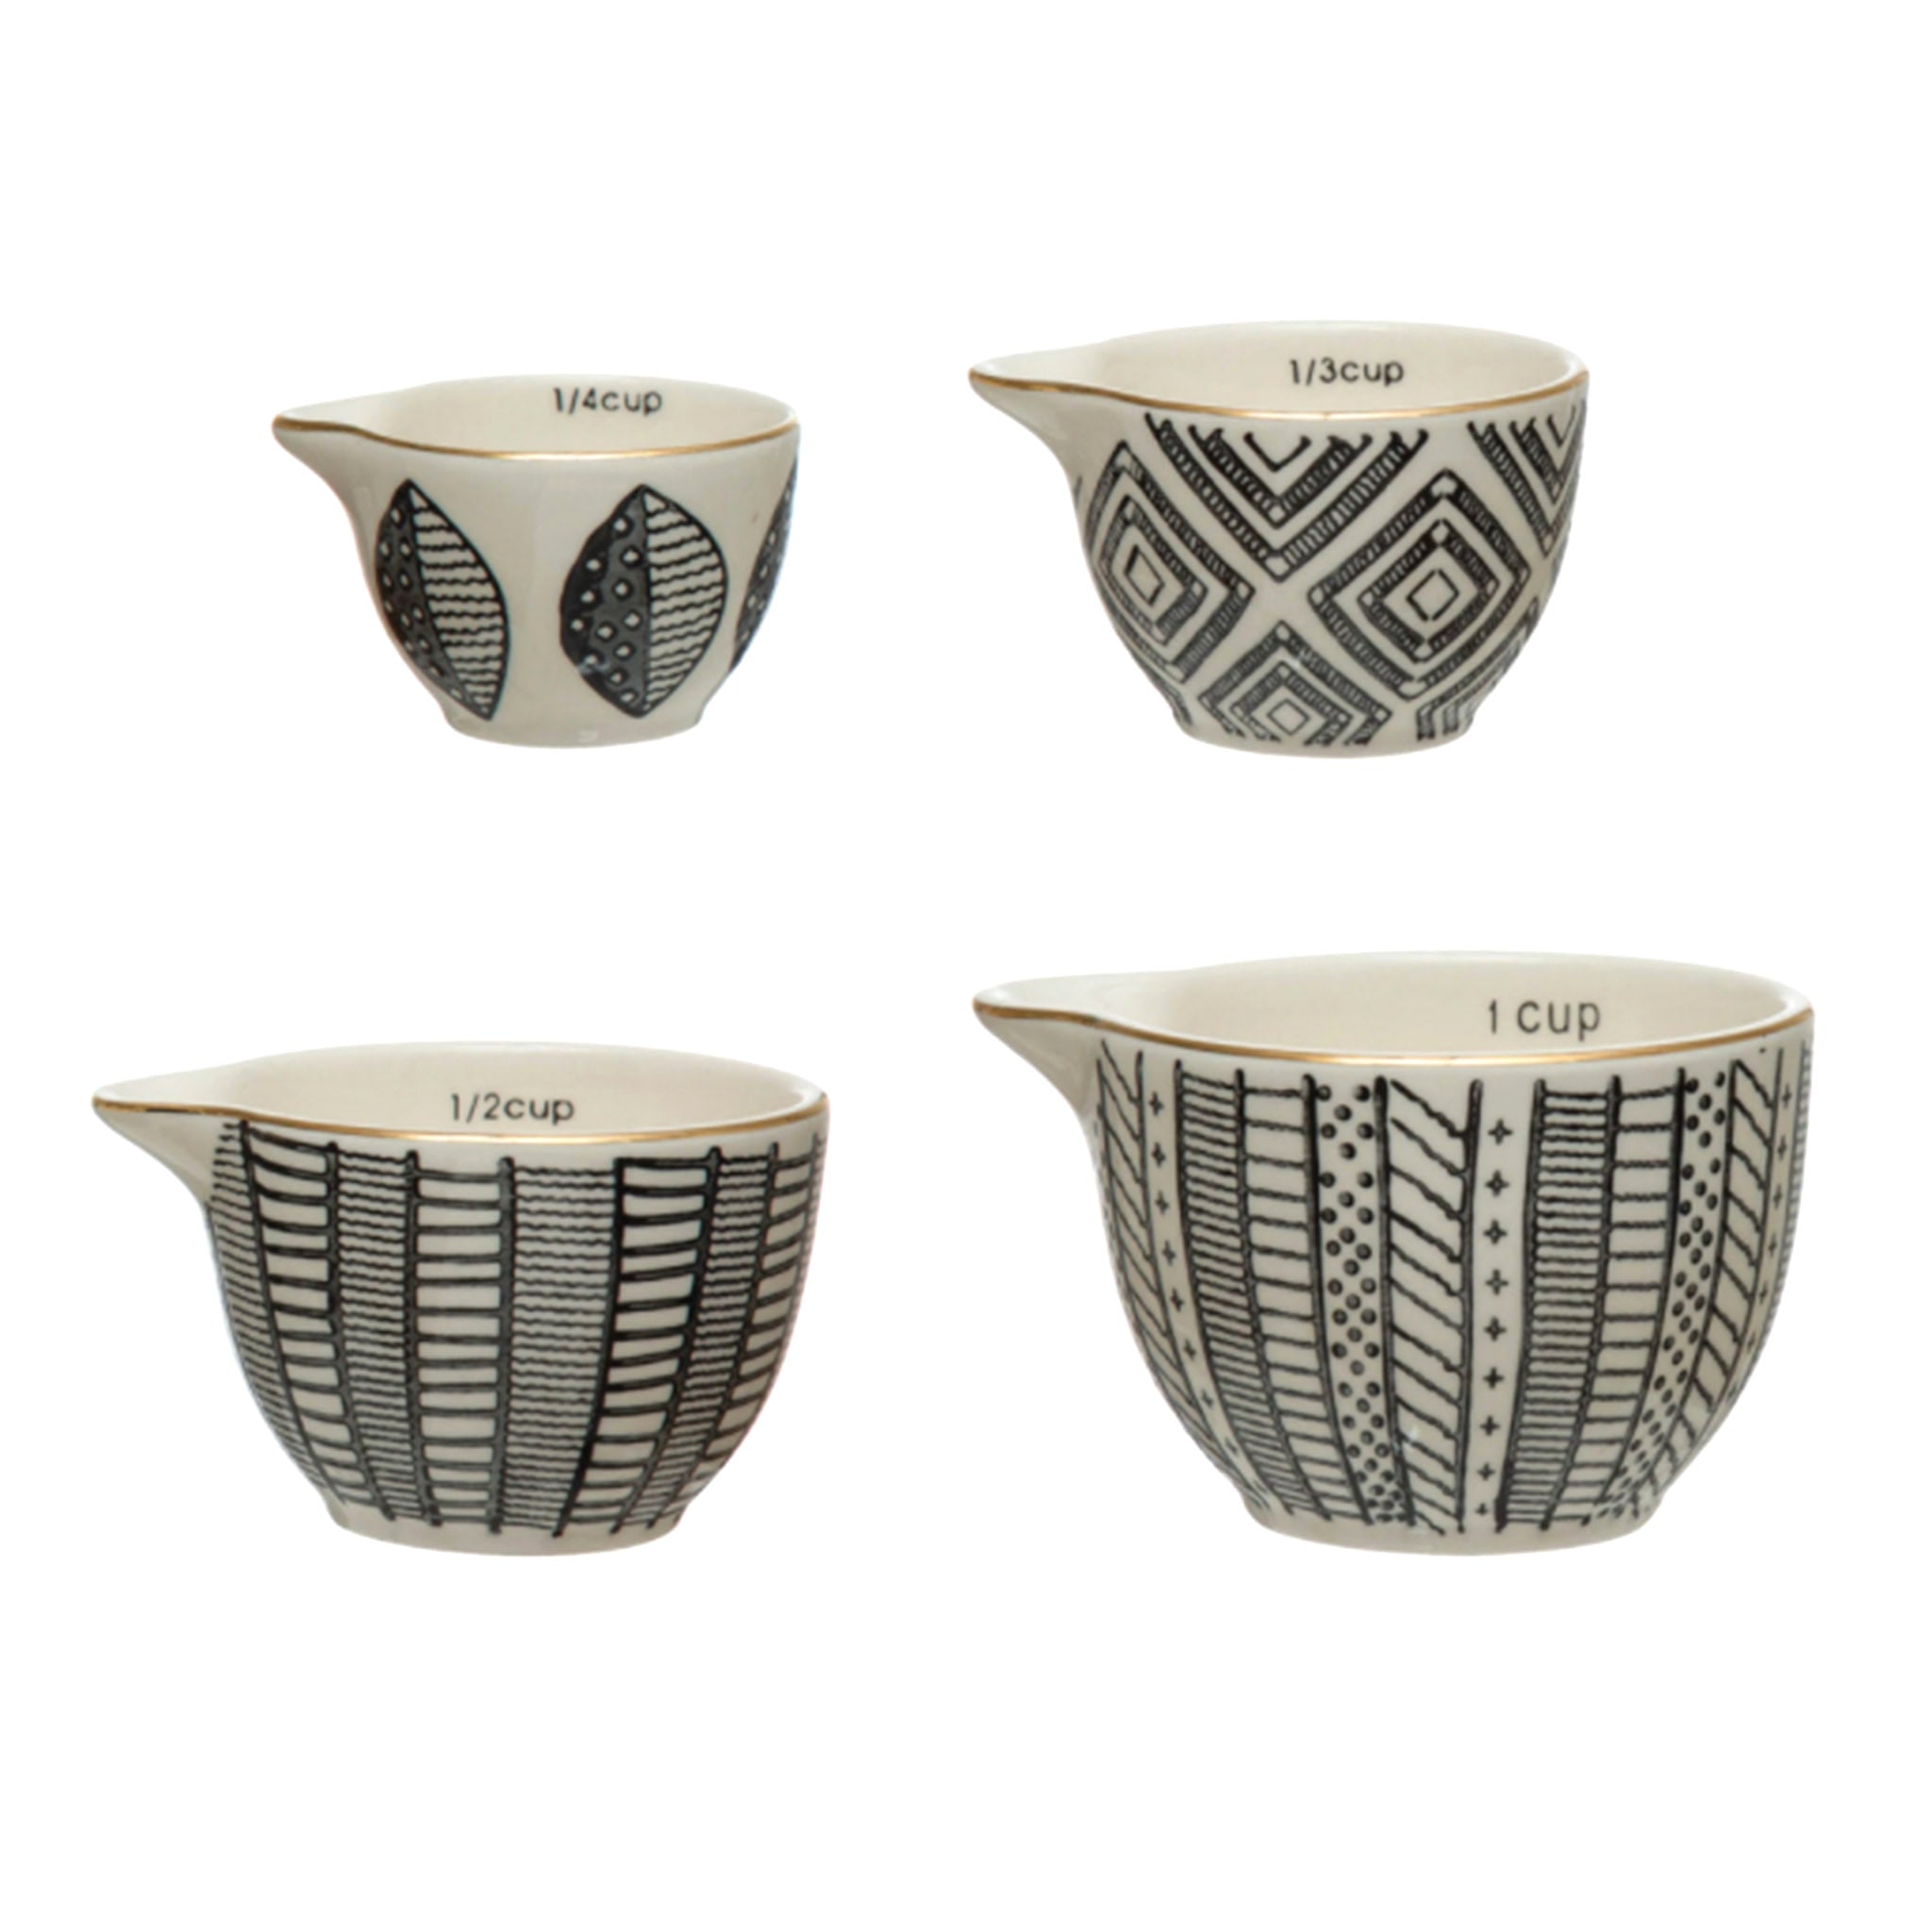 https://blueribbongeneralstore.com/cdn/shop/products/creative-coop-df4366-set-of-four-nesting-hand-painted-stoneware-measuring-cups-black-and-white-pattern-with-gold-rim.jpg?v=1637948223